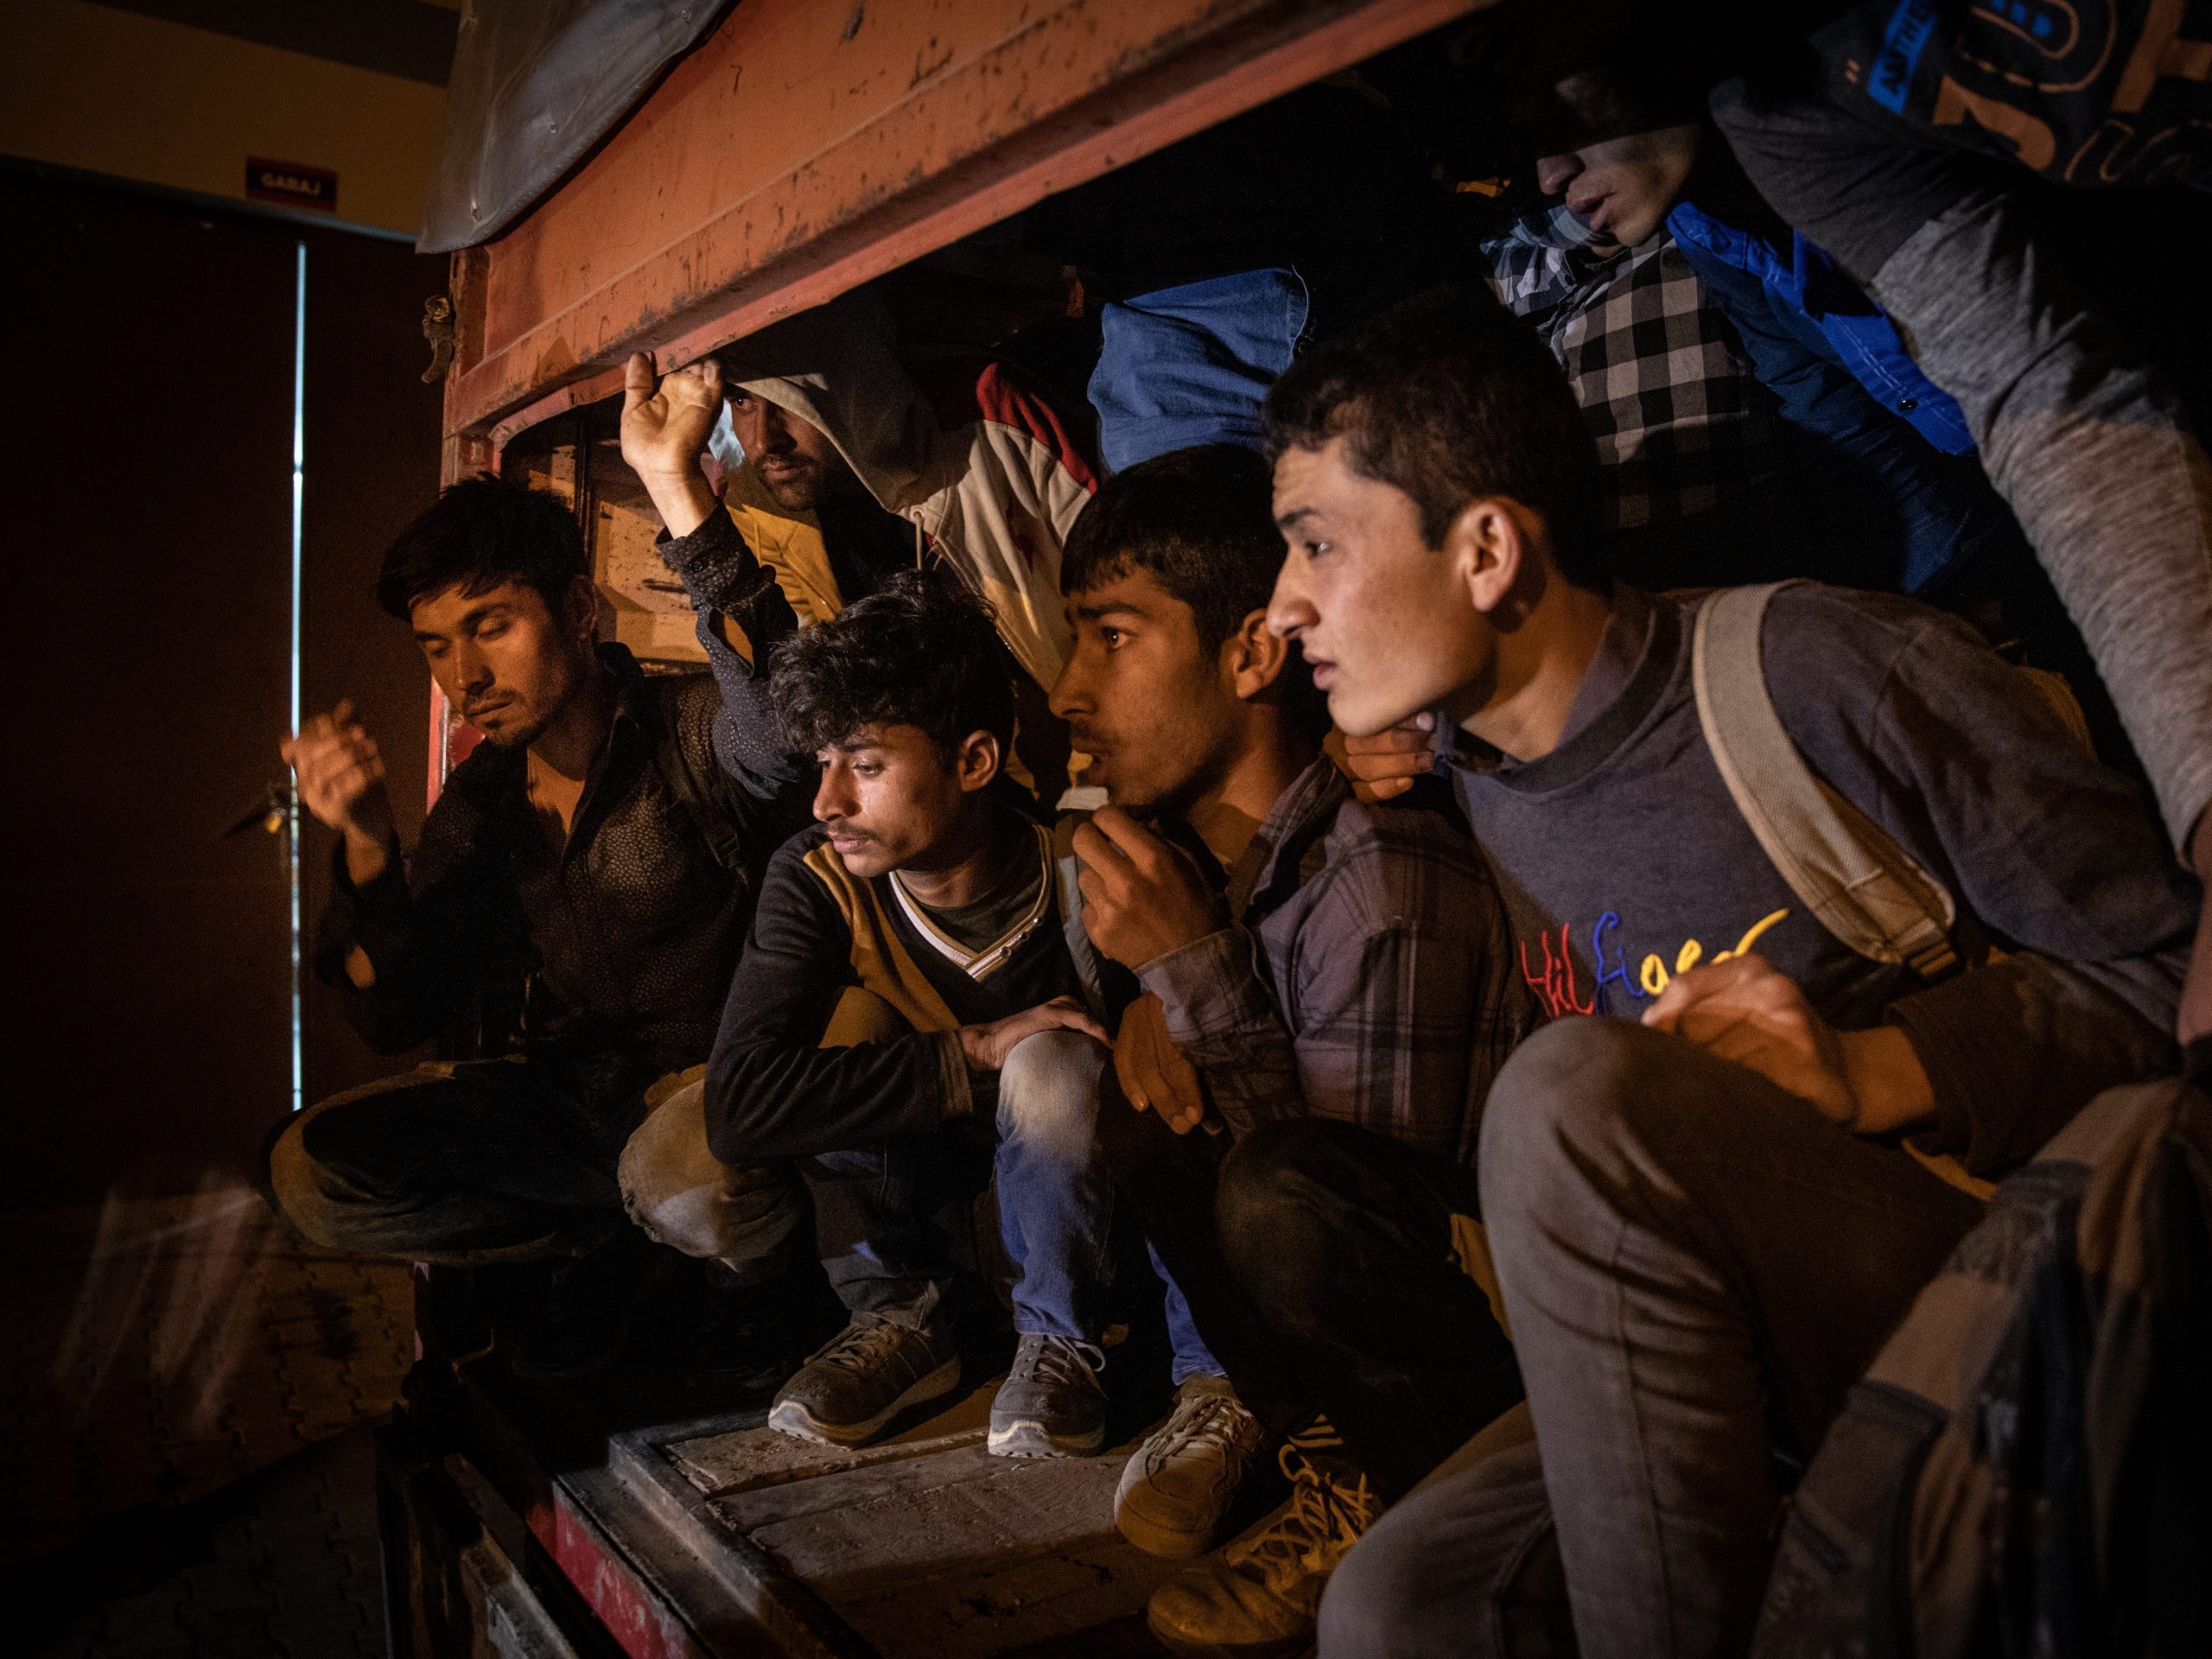 Afghan migrants waiting in a smuggler’s truck after it was seized in Turkey.